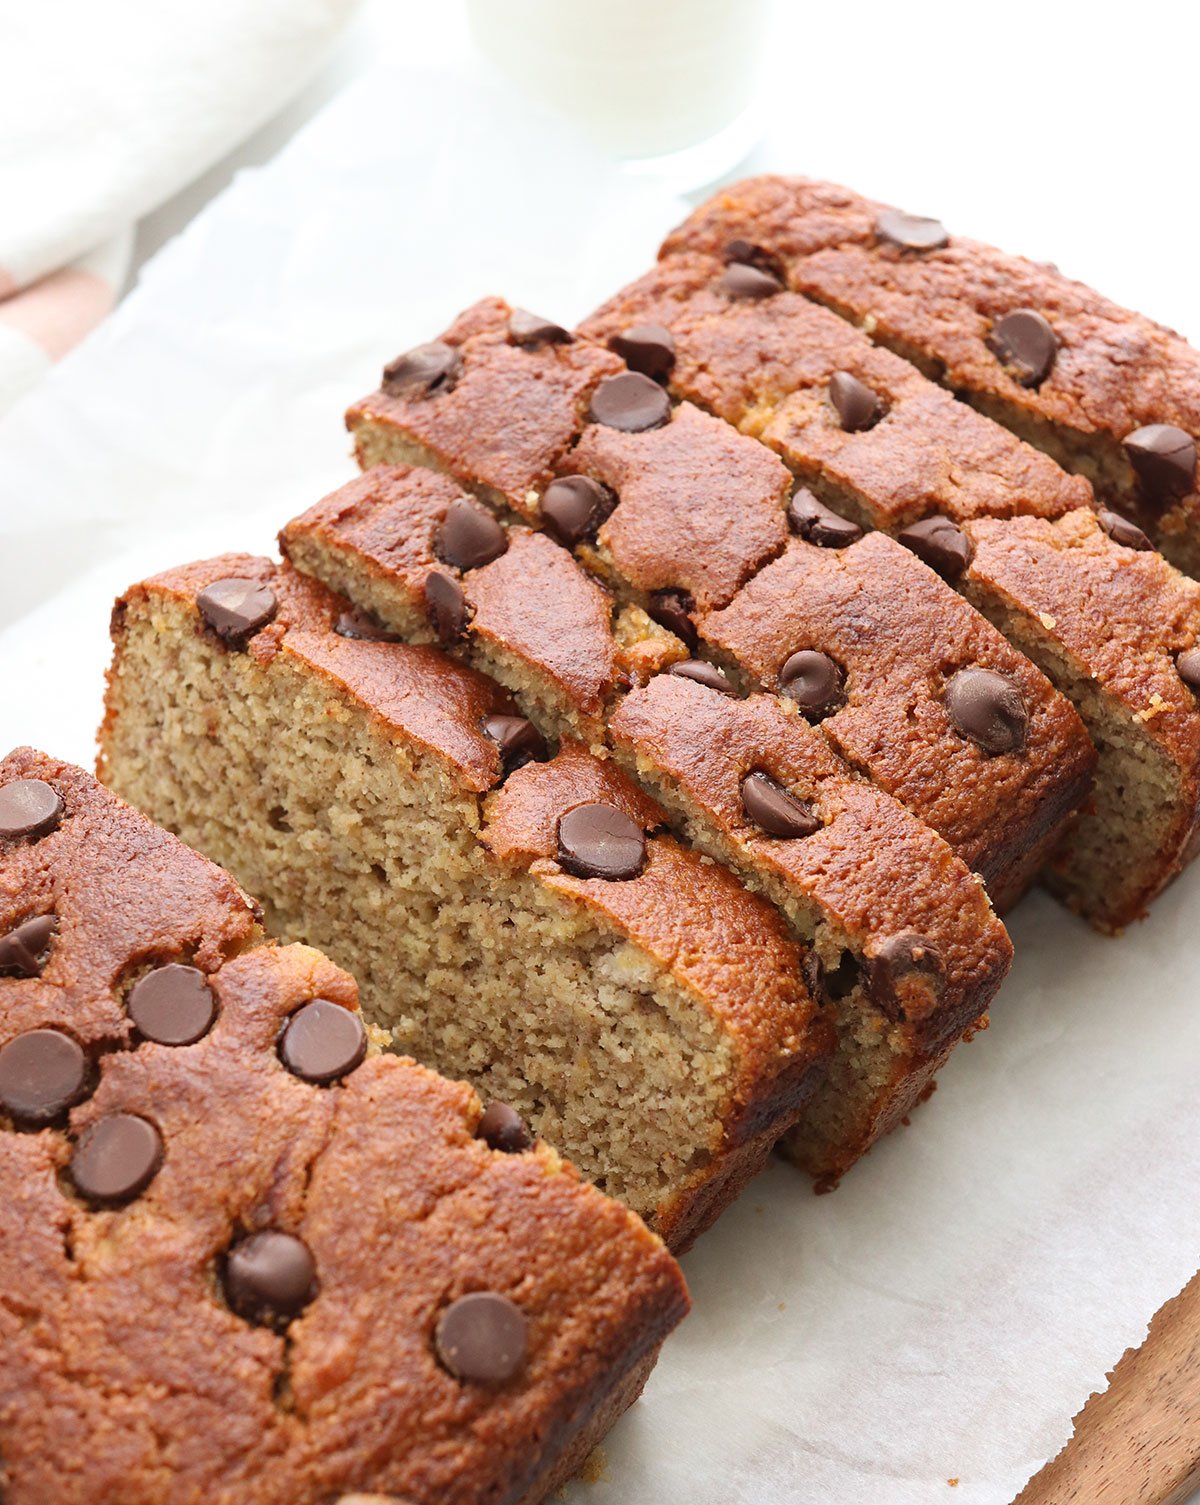 almond flour banana bread sliced and topped with chocolate chips.